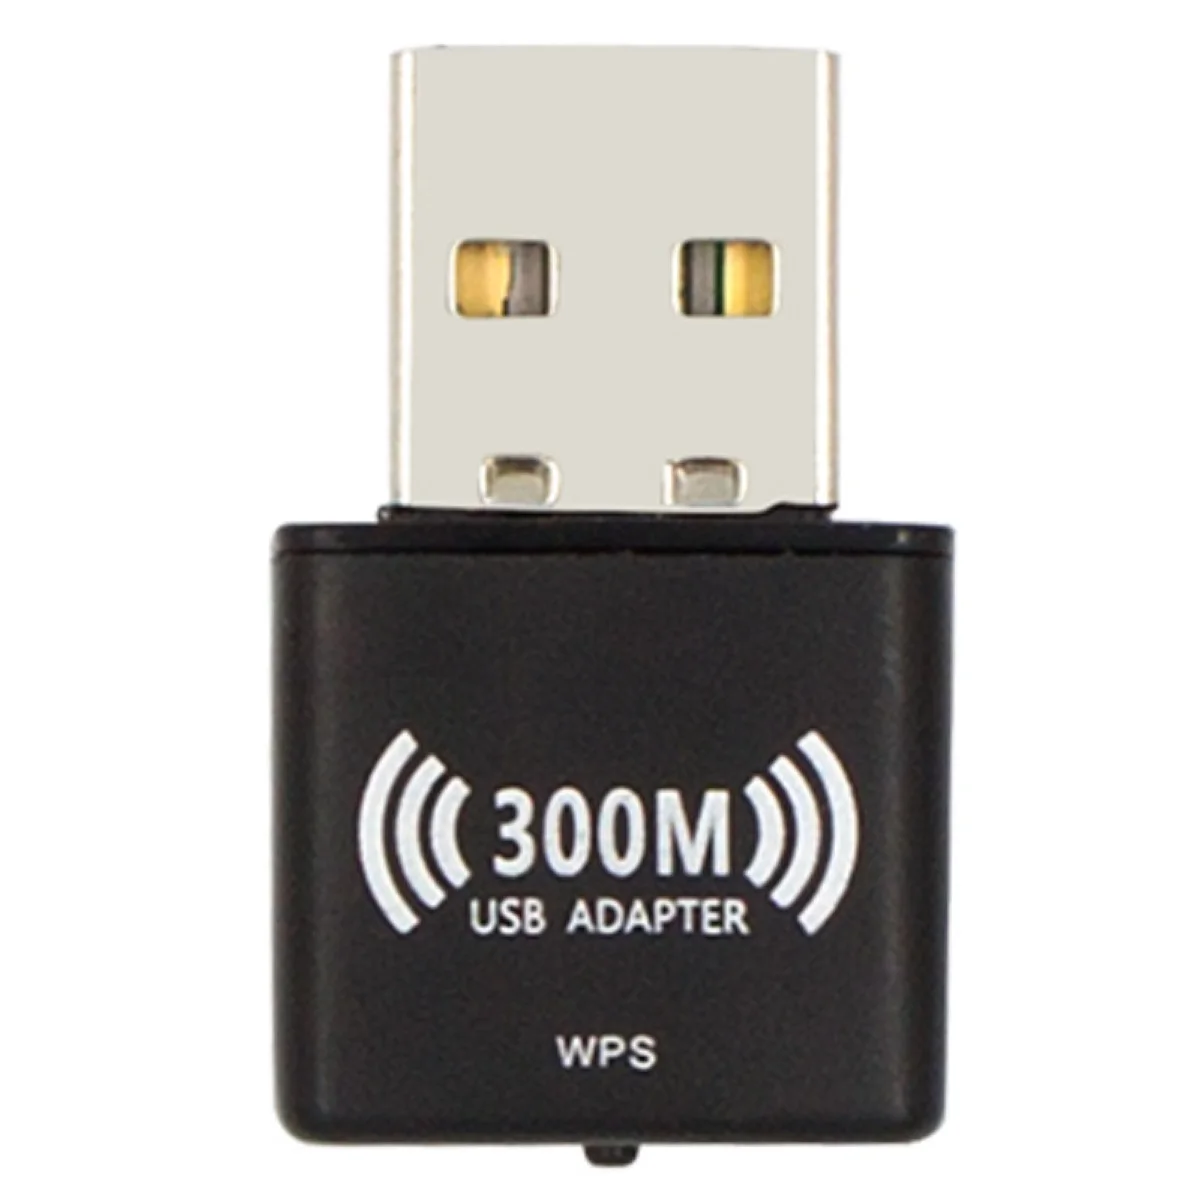 

Bulk sell 802.11b/G/N RTL8192 chipset mini 2.4G 300Mbps USB WiFi Wireless Adapter Dongle for laptop PC